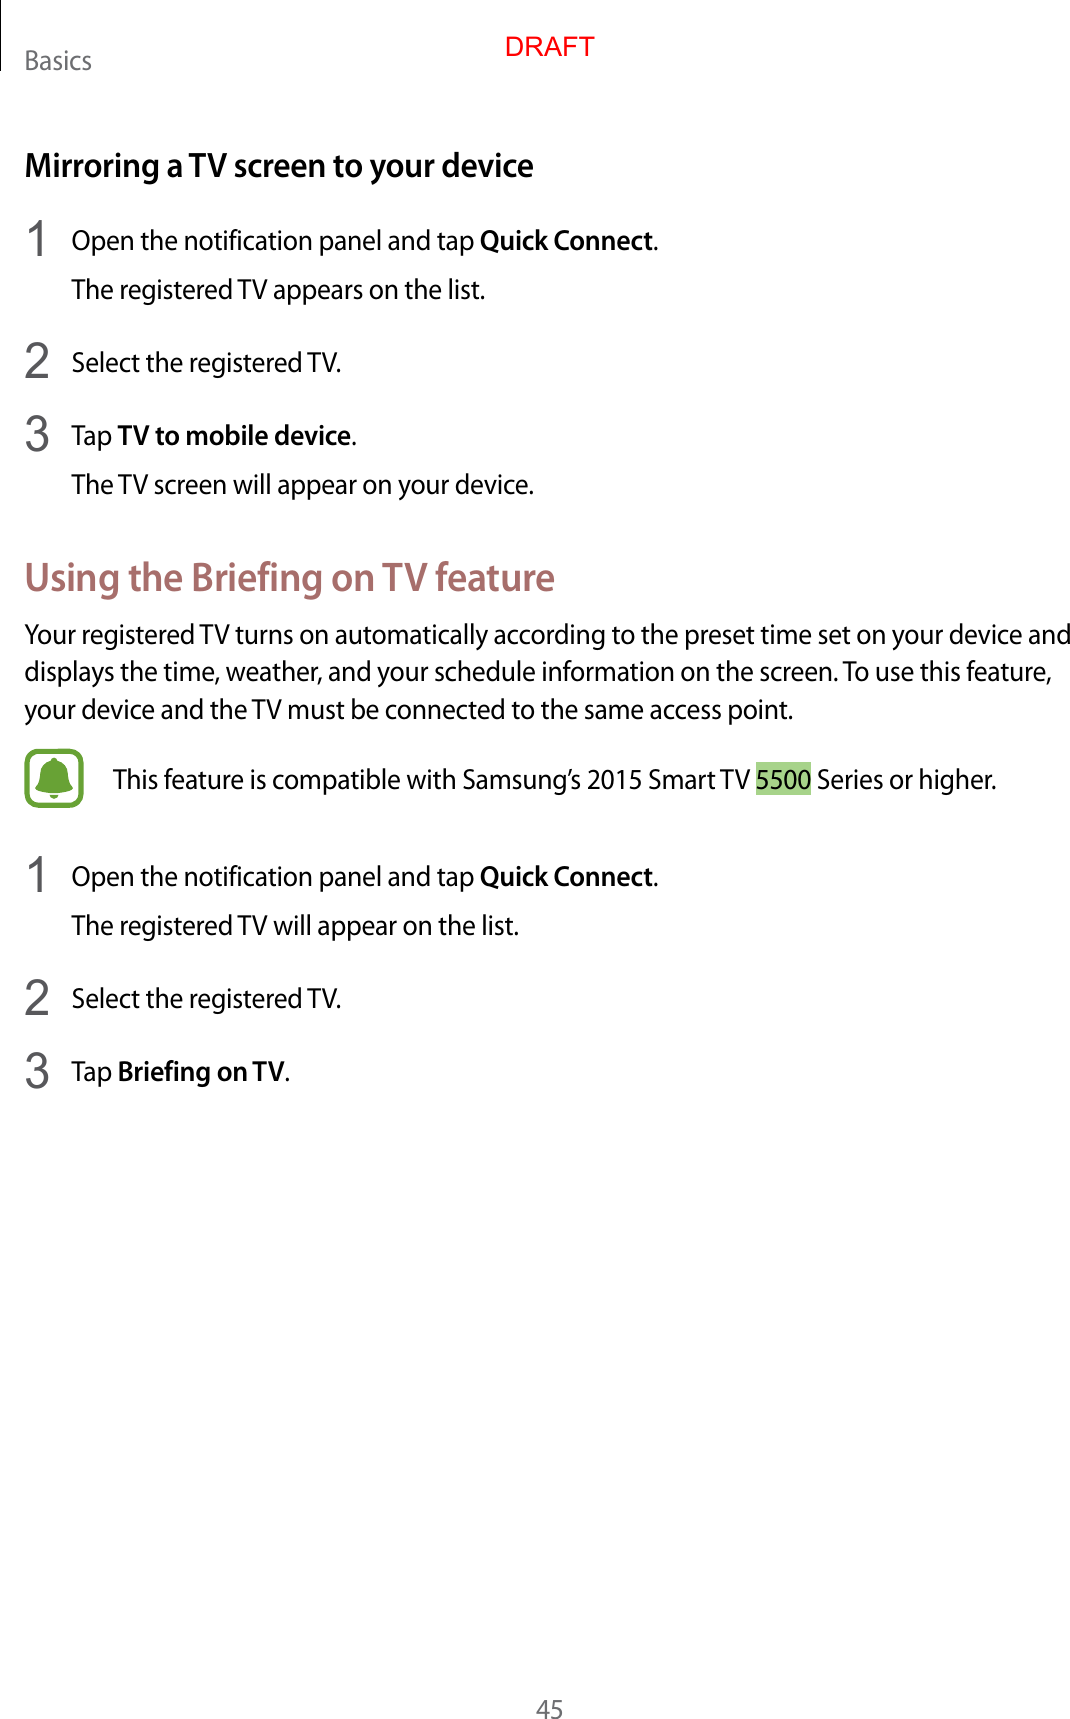 Basics45Mirroring a TV screen to your device1  Open the notification panel and tap Quick Connect.The registered TV appears on the list.2  Select the registered TV.3  Tap TV to mobile device.The TV screen will appear on your device.Using the Briefing on TV featureYour registered TV turns on automatically according to the preset time set on your device and displays the time, weather, and your schedule information on the screen. To use this feature, your device and the TV must be connected to the same access point.This feature is compatible with Samsung’s 2015 Smart TV 5500 Series or higher.1  Open the notification panel and tap Quick Connect.The registered TV will appear on the list.2  Select the registered TV.3  Tap Briefing on TV.DRAFT